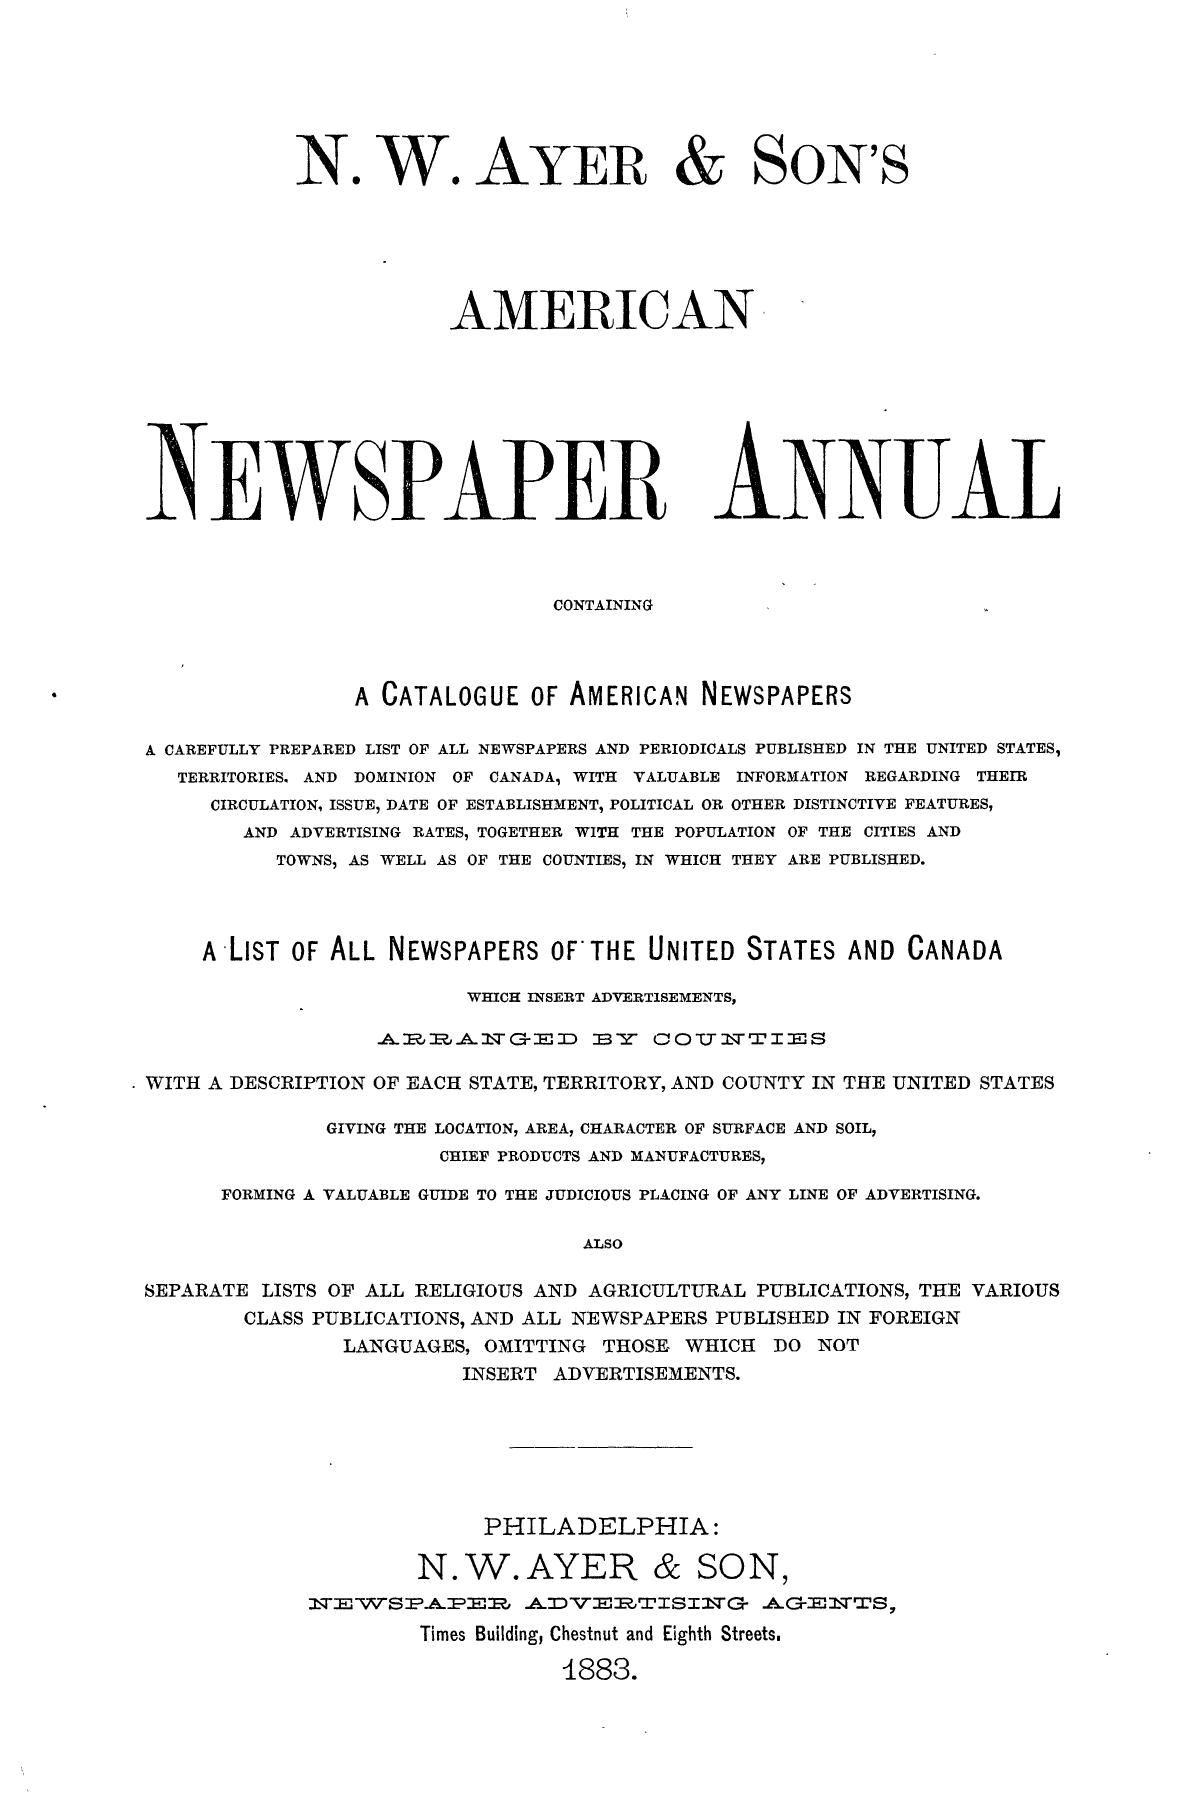 N. W. Ayer & Son's American Newspaper Annual: containing a Catalogue of American Newspapers, a List of All Newspapers of the United States and Canada, 1883
                                                
                                                    Title Page
                                                